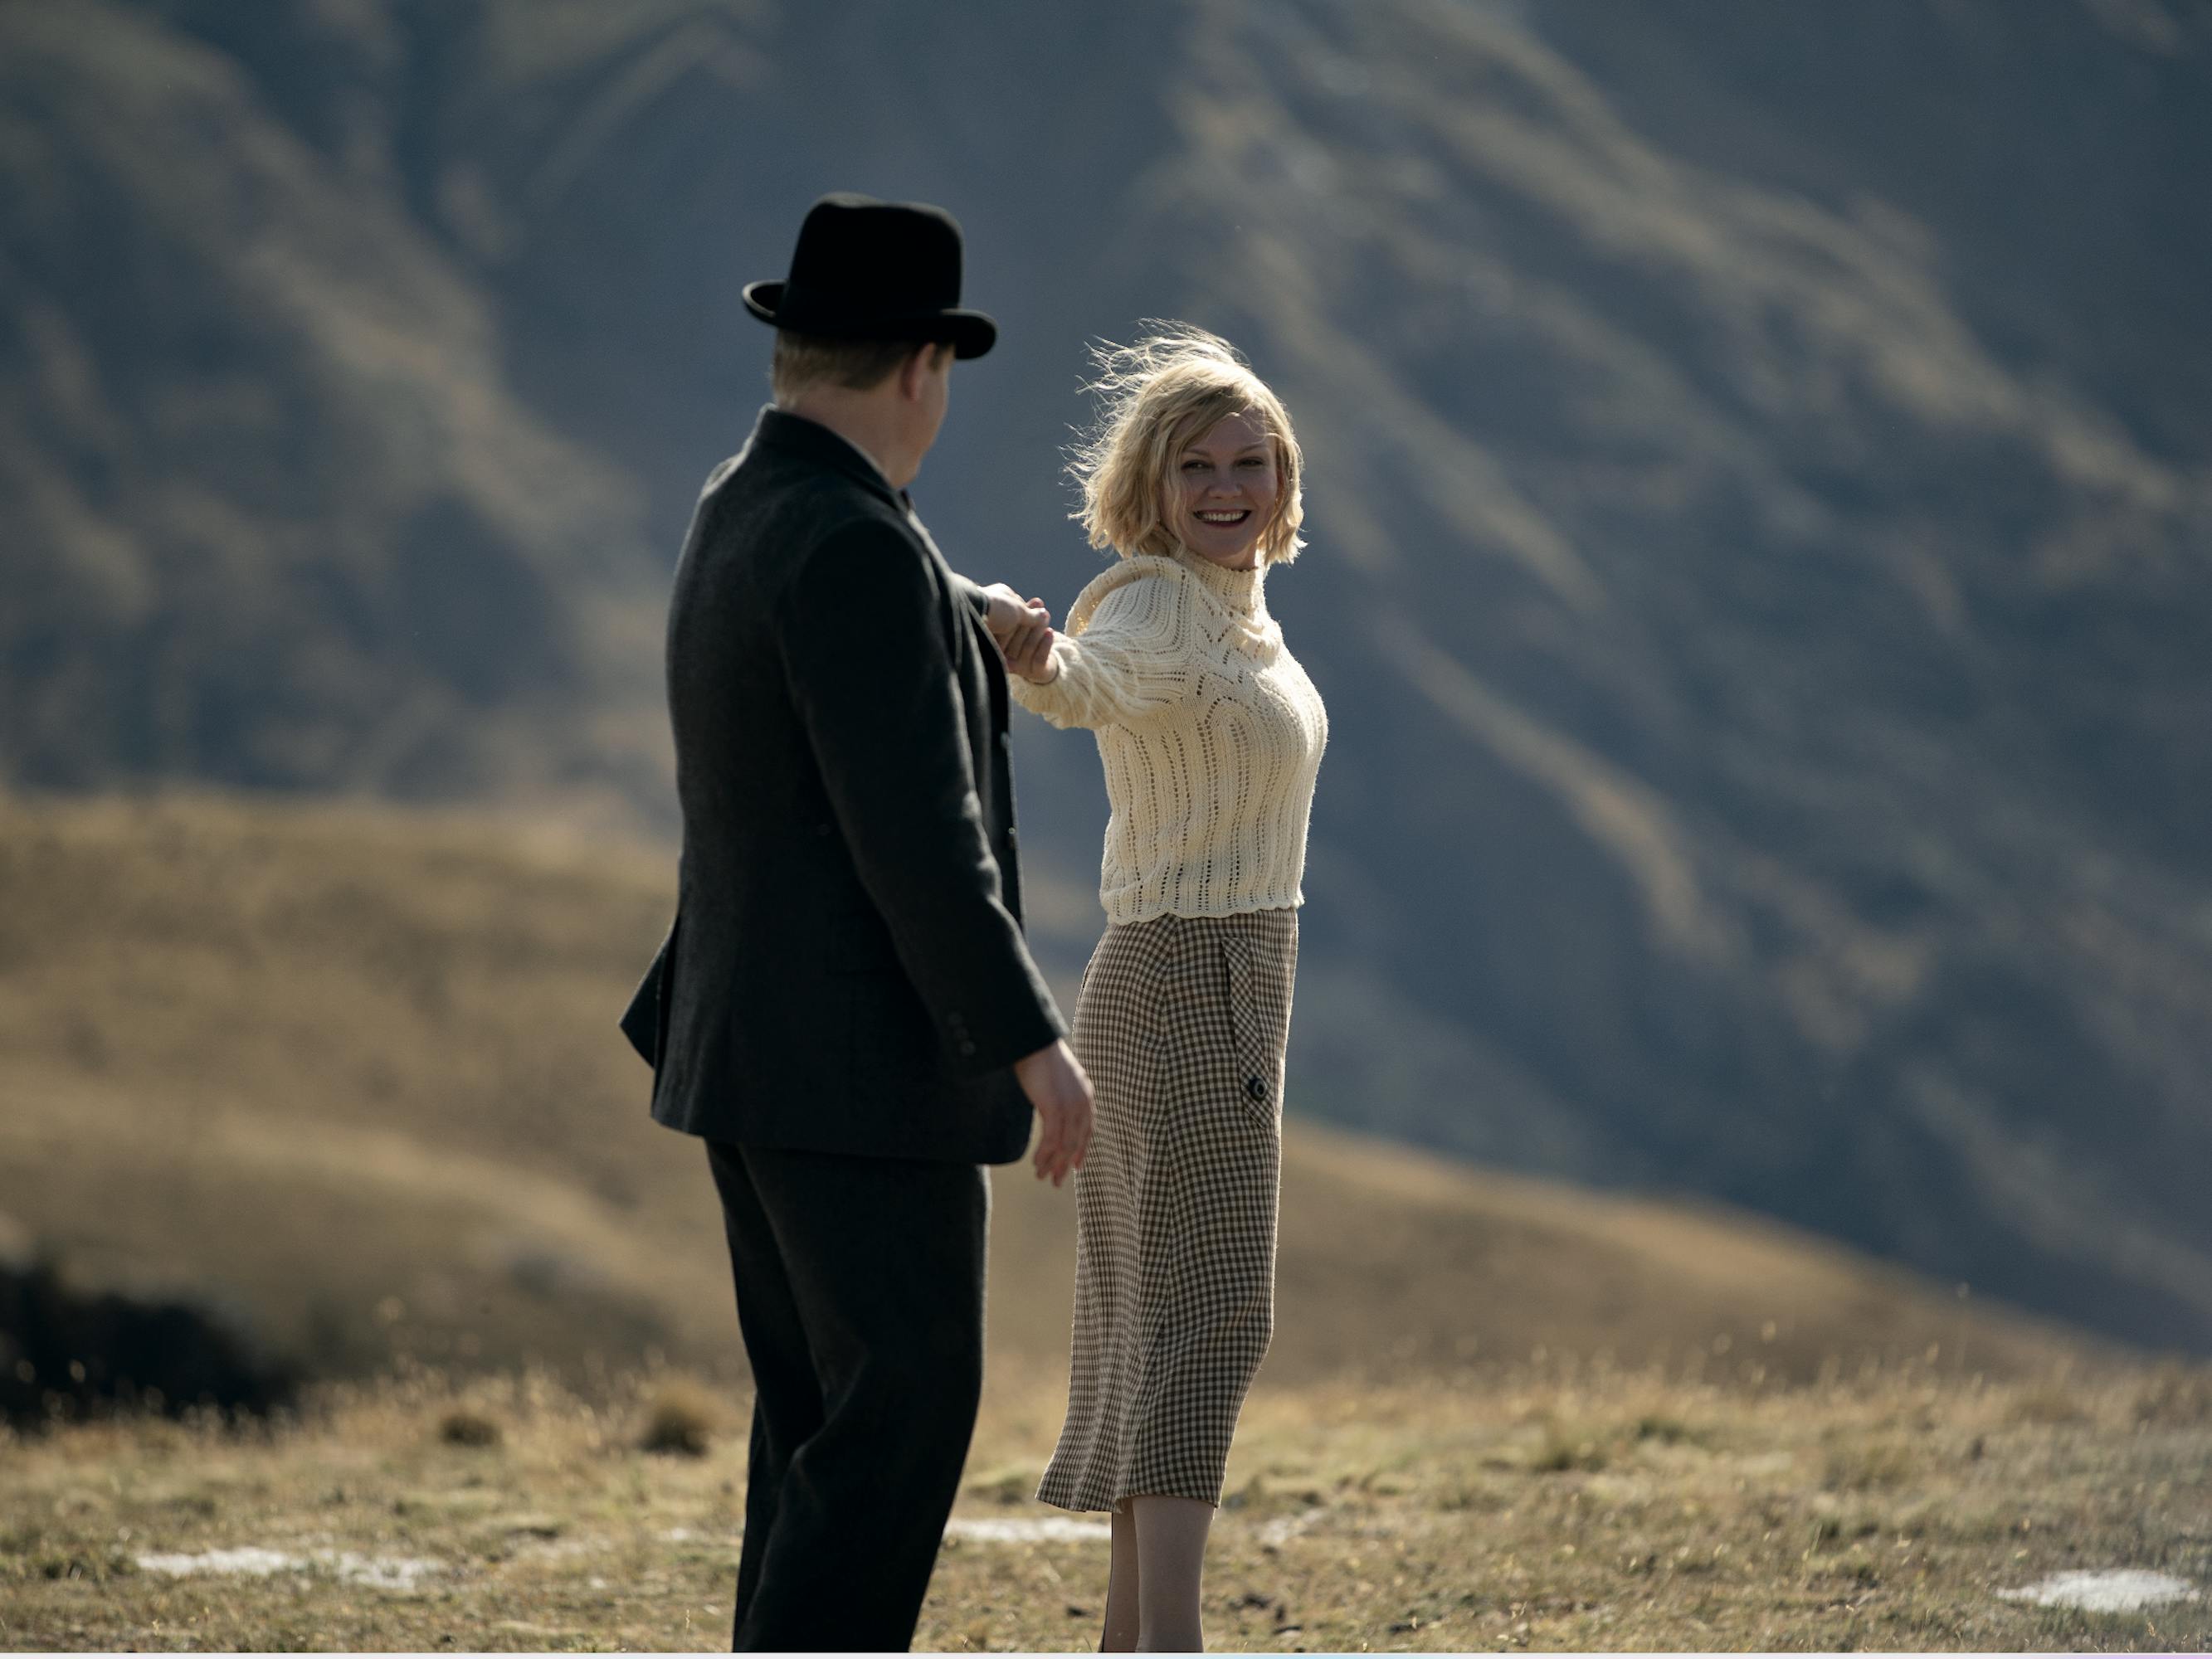 Jesse Plemons and Kirsten Dunst dance on a hilltop. He wears a dark suit and a hat, she wears a sheer blouse and a khaki skirt. The mountain behind them is blue, and the ground is dusty brown.